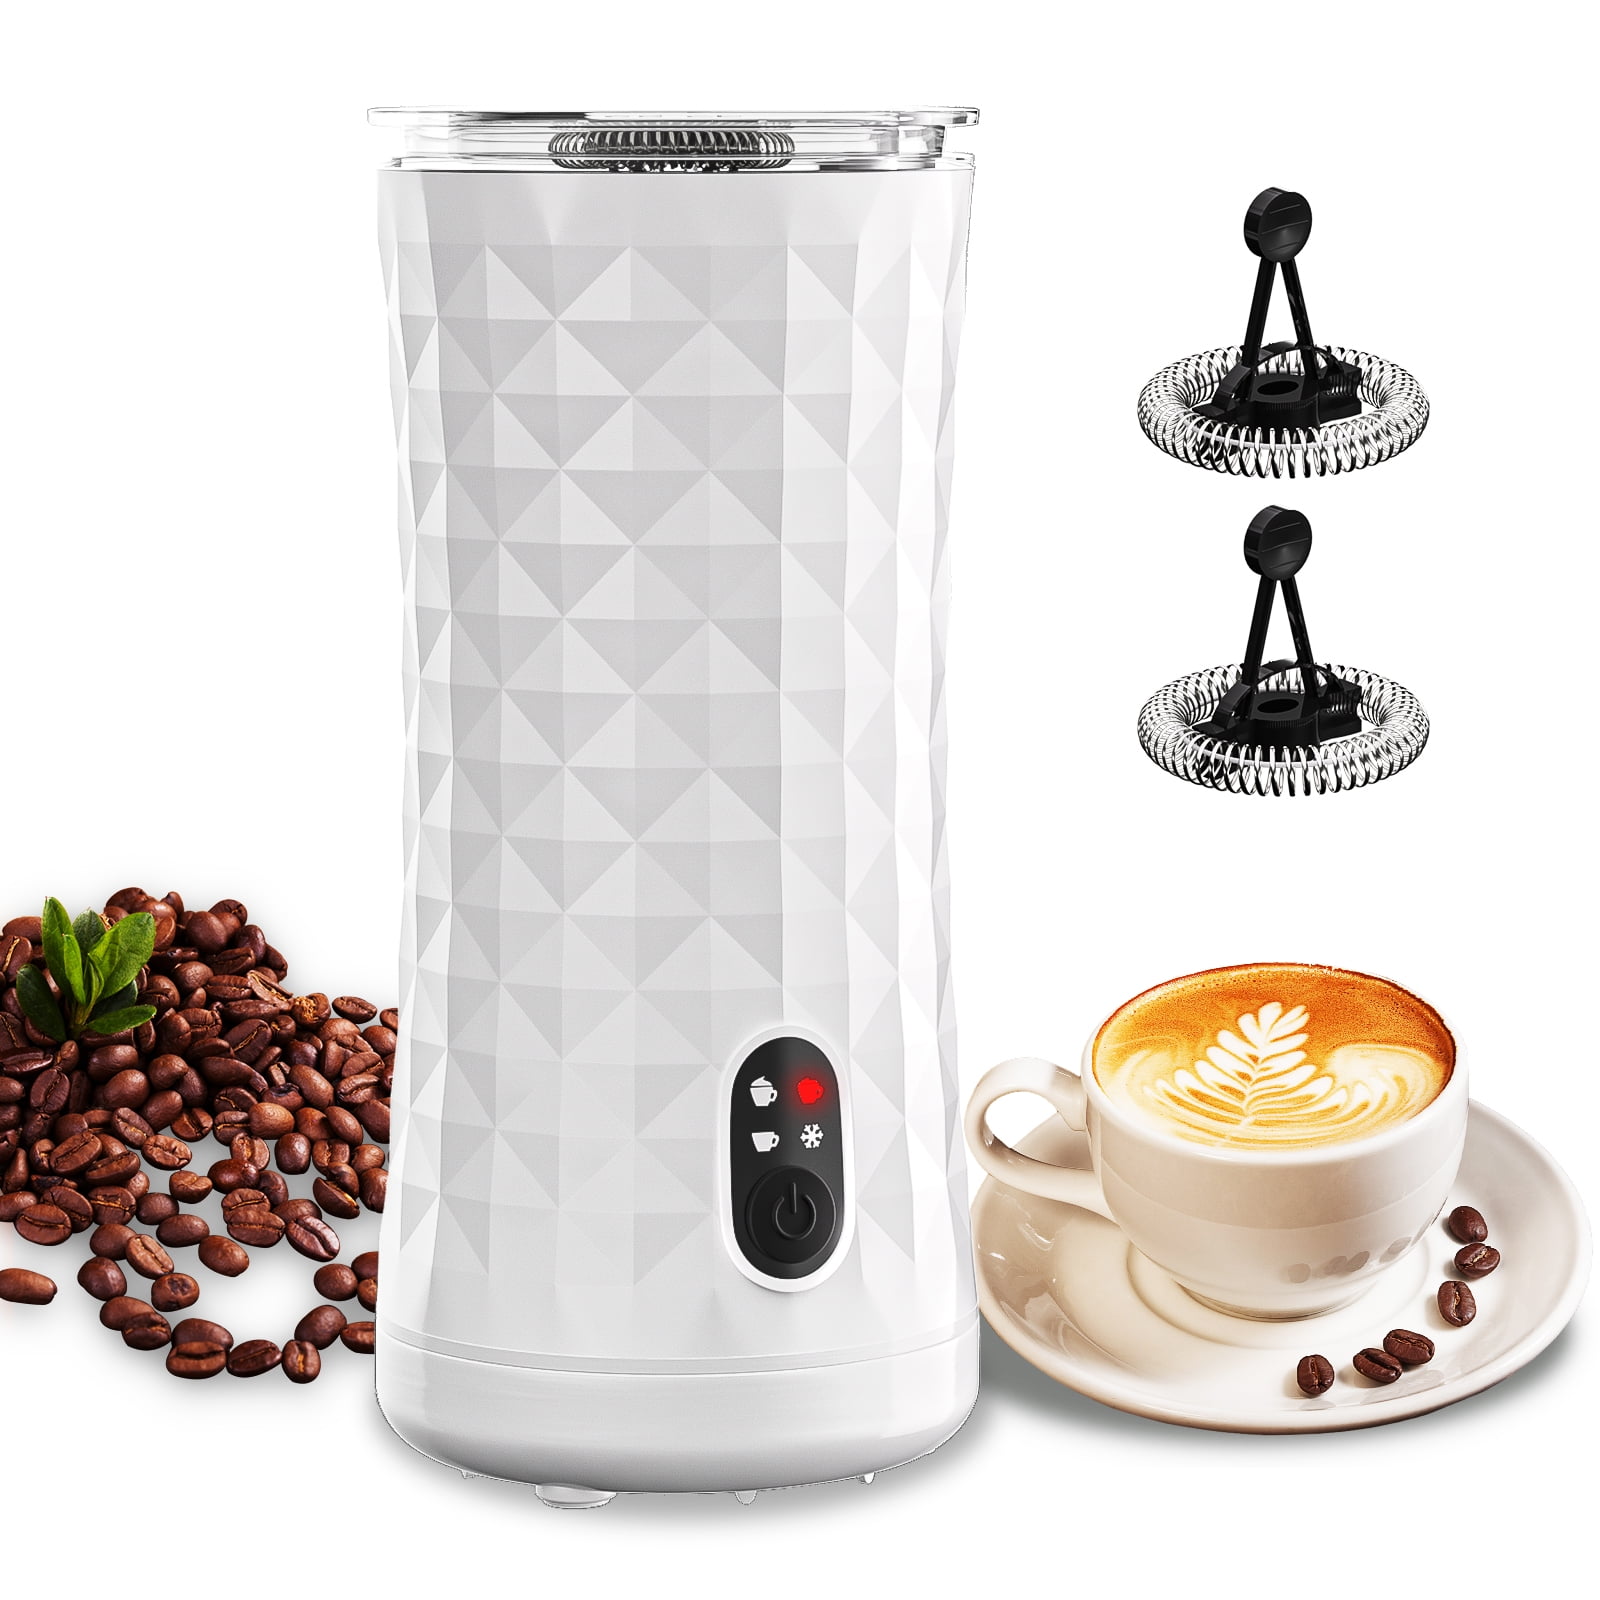 NINJA 5-oz. Coffee Bar Easy Milk Frother with clear interior